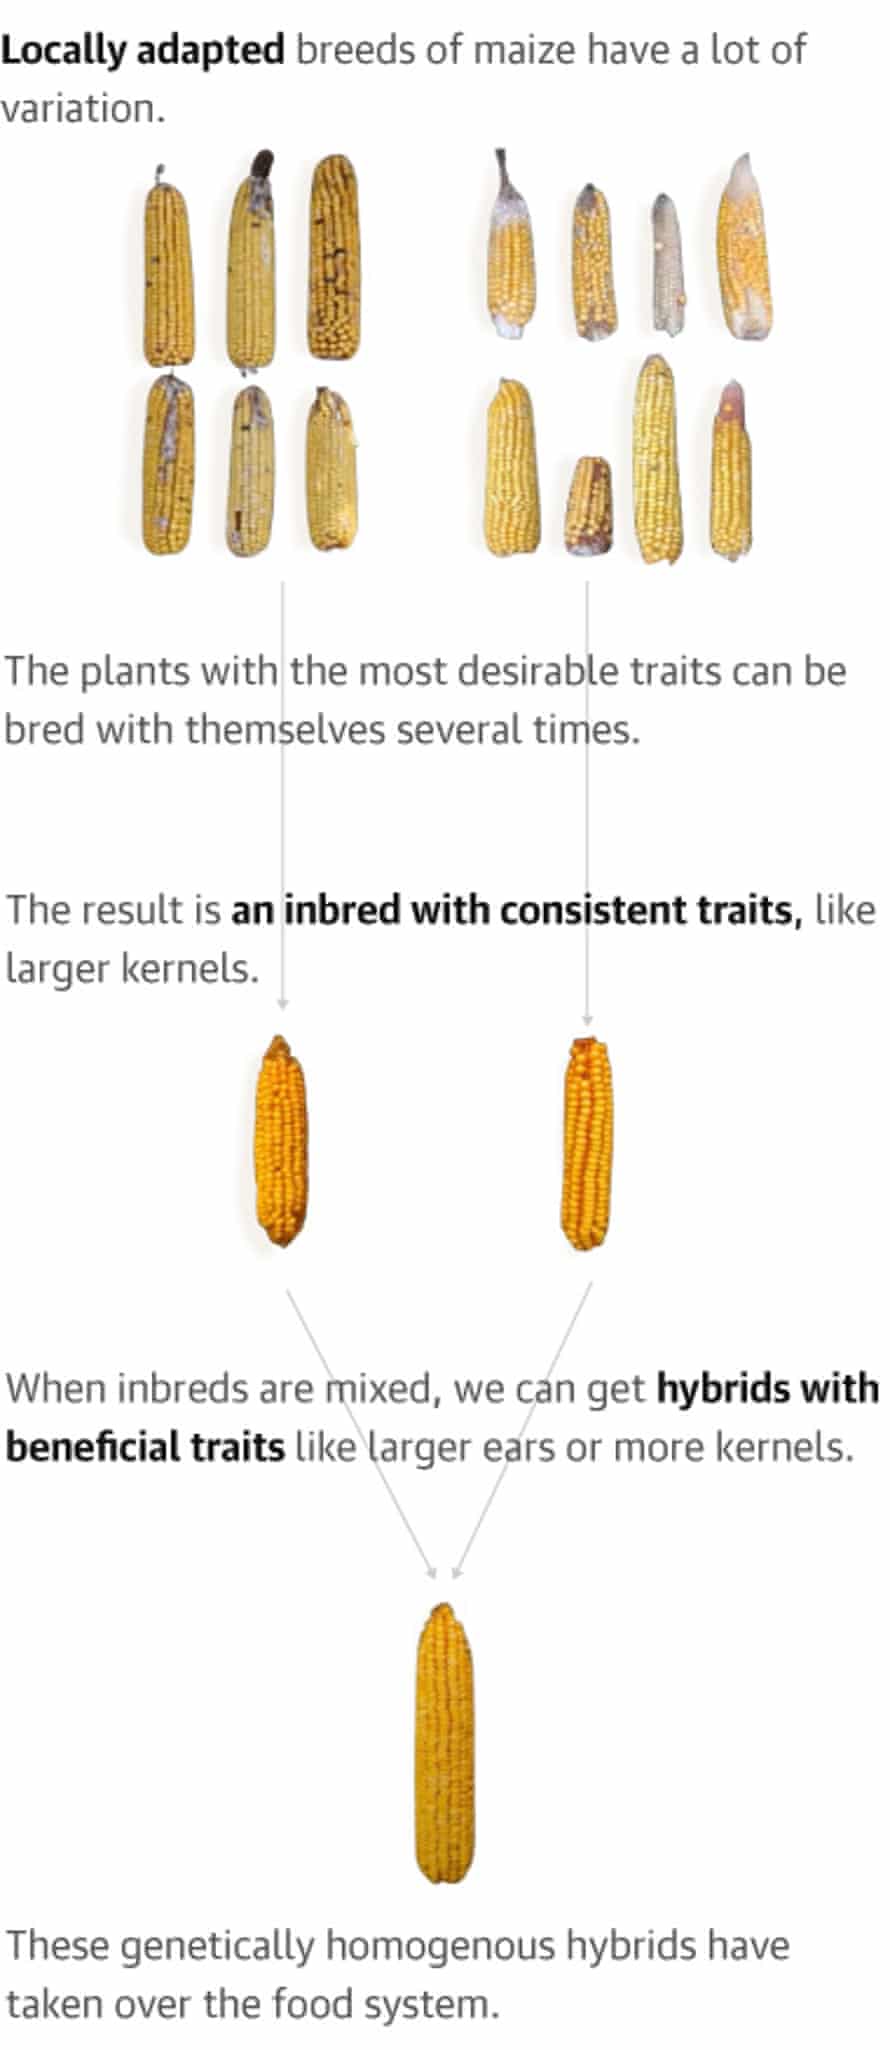 A chart shows a tree graphic of ears of corn being bred and improving in quality at each level with the words: Locally adapted breeds of maize have a lot of variation. The plants with the most desirable traits can be bred with themselves several times. The result is an inbred with consistent traits, like larger kernels. When inbreds are mixed, we can get hybrids with beneficial traits like larger ears or more kernels. These genetically homogenous hybrids have taken over the food system.